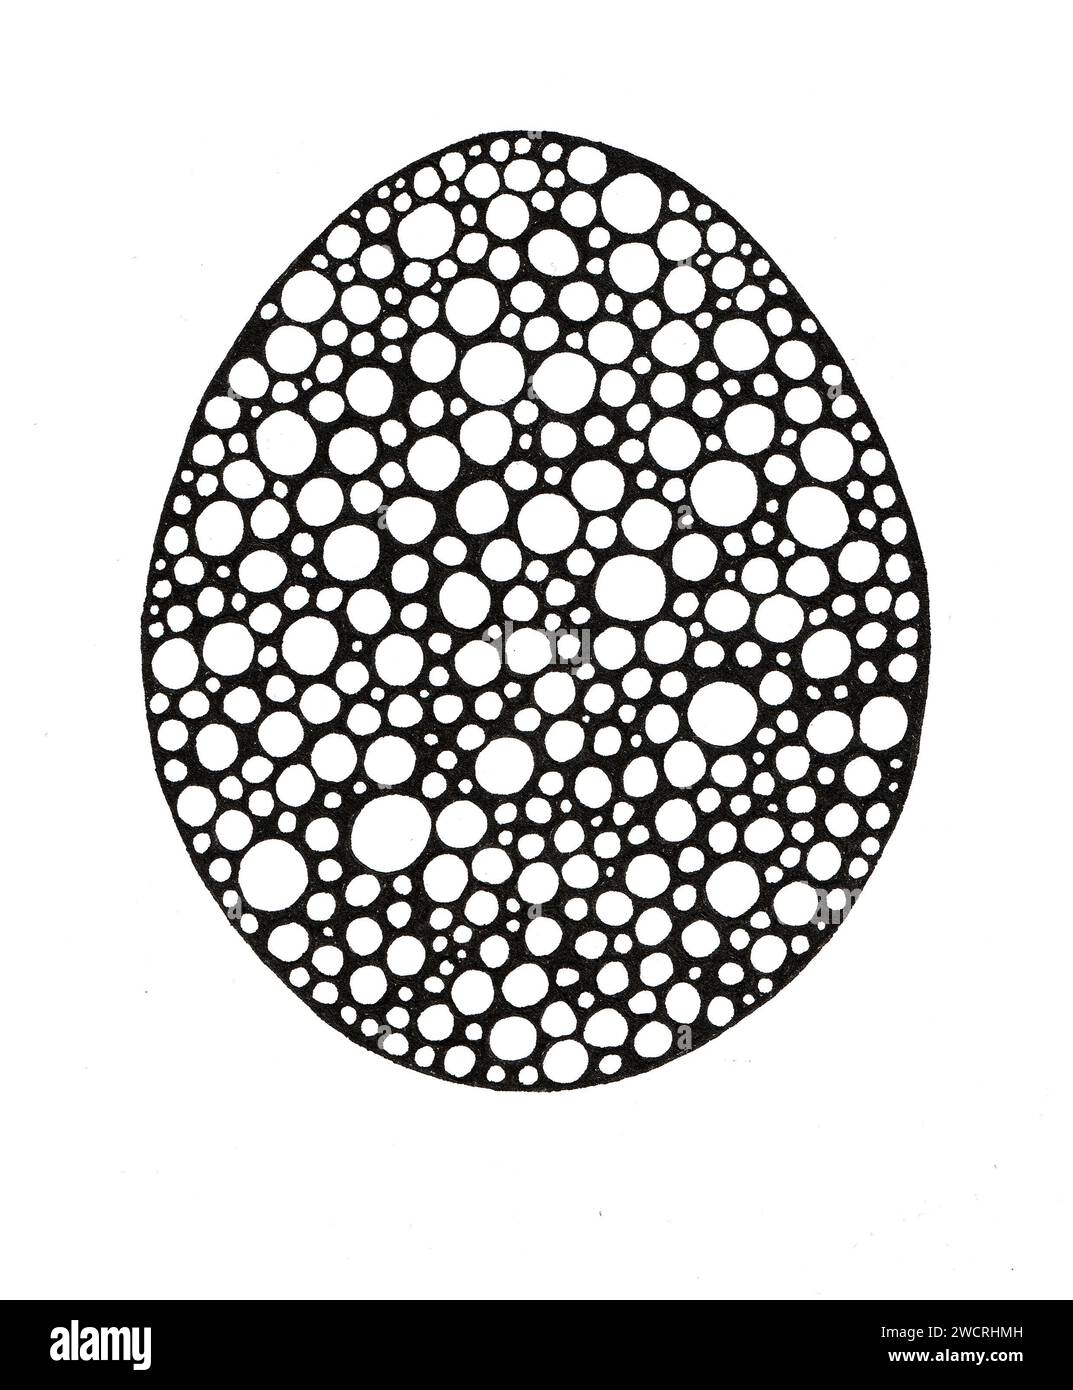 The black oval is filled with white circles and dots of different sizes. Isolated on white background. Easter egg. It is a tradition to paint eggs on Easter. Doodle. Stock Photo